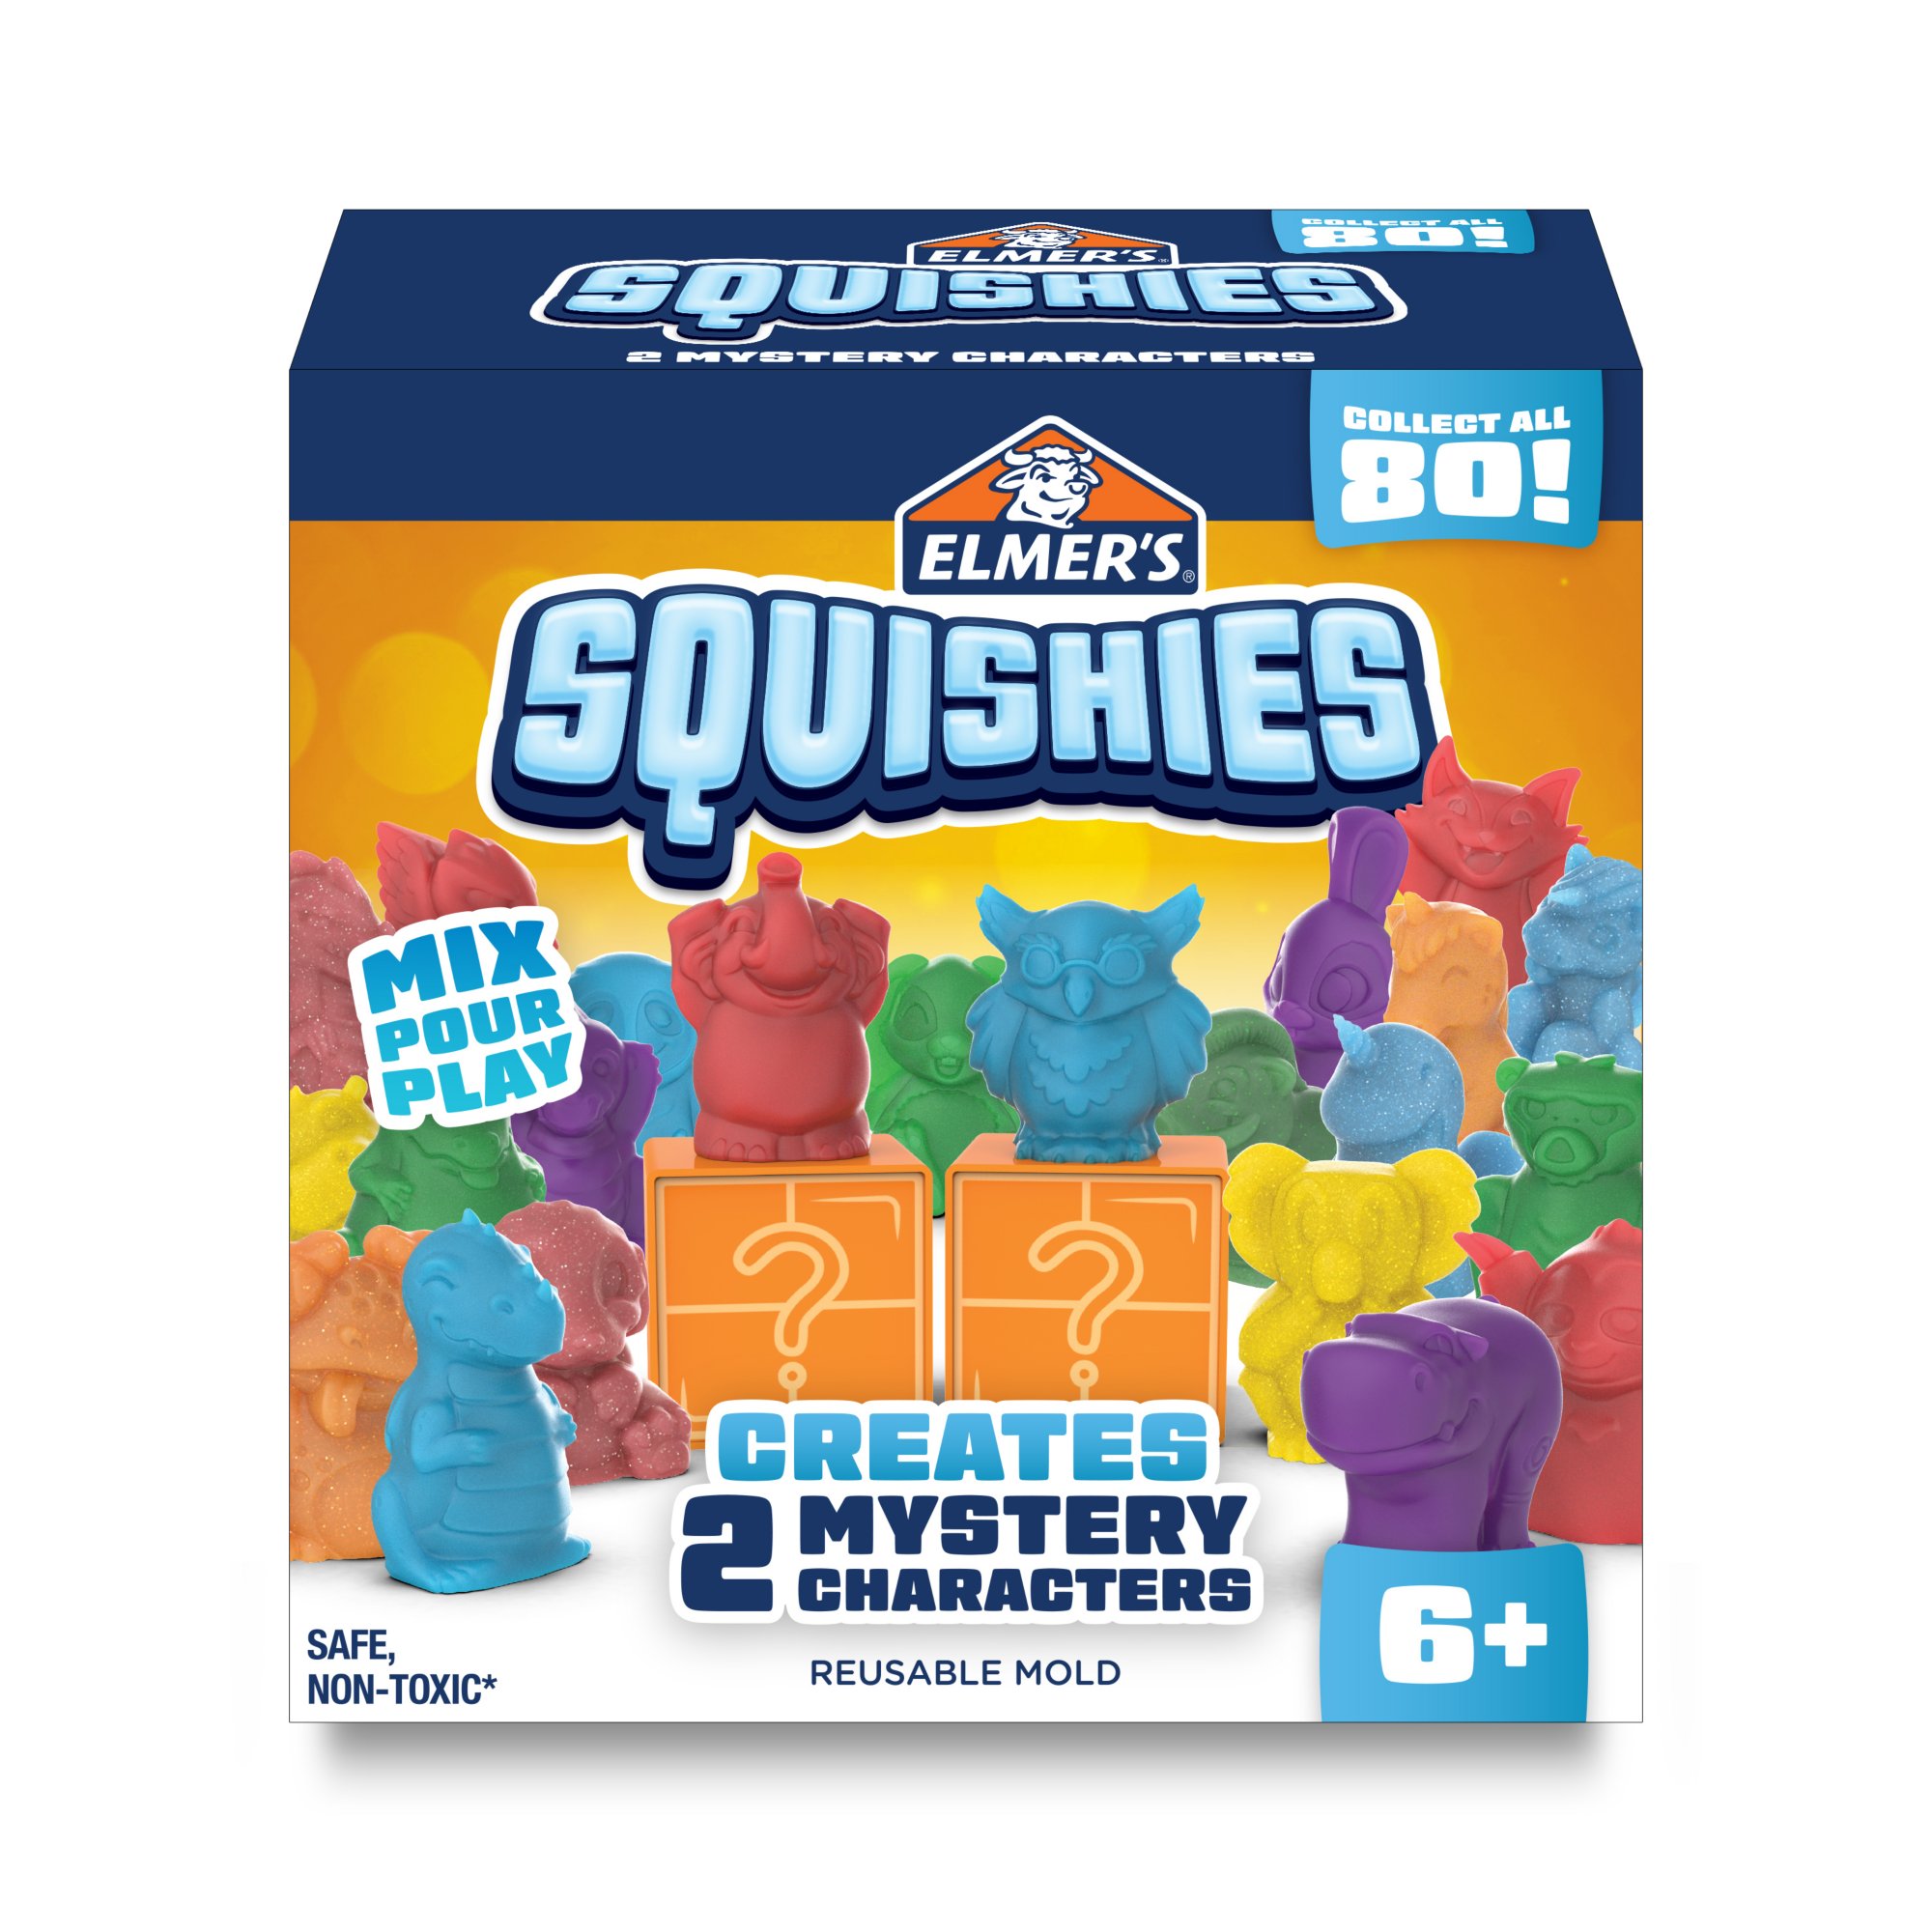 Elmer's Squishies Kit, 2 Mystery Characters | Elmers